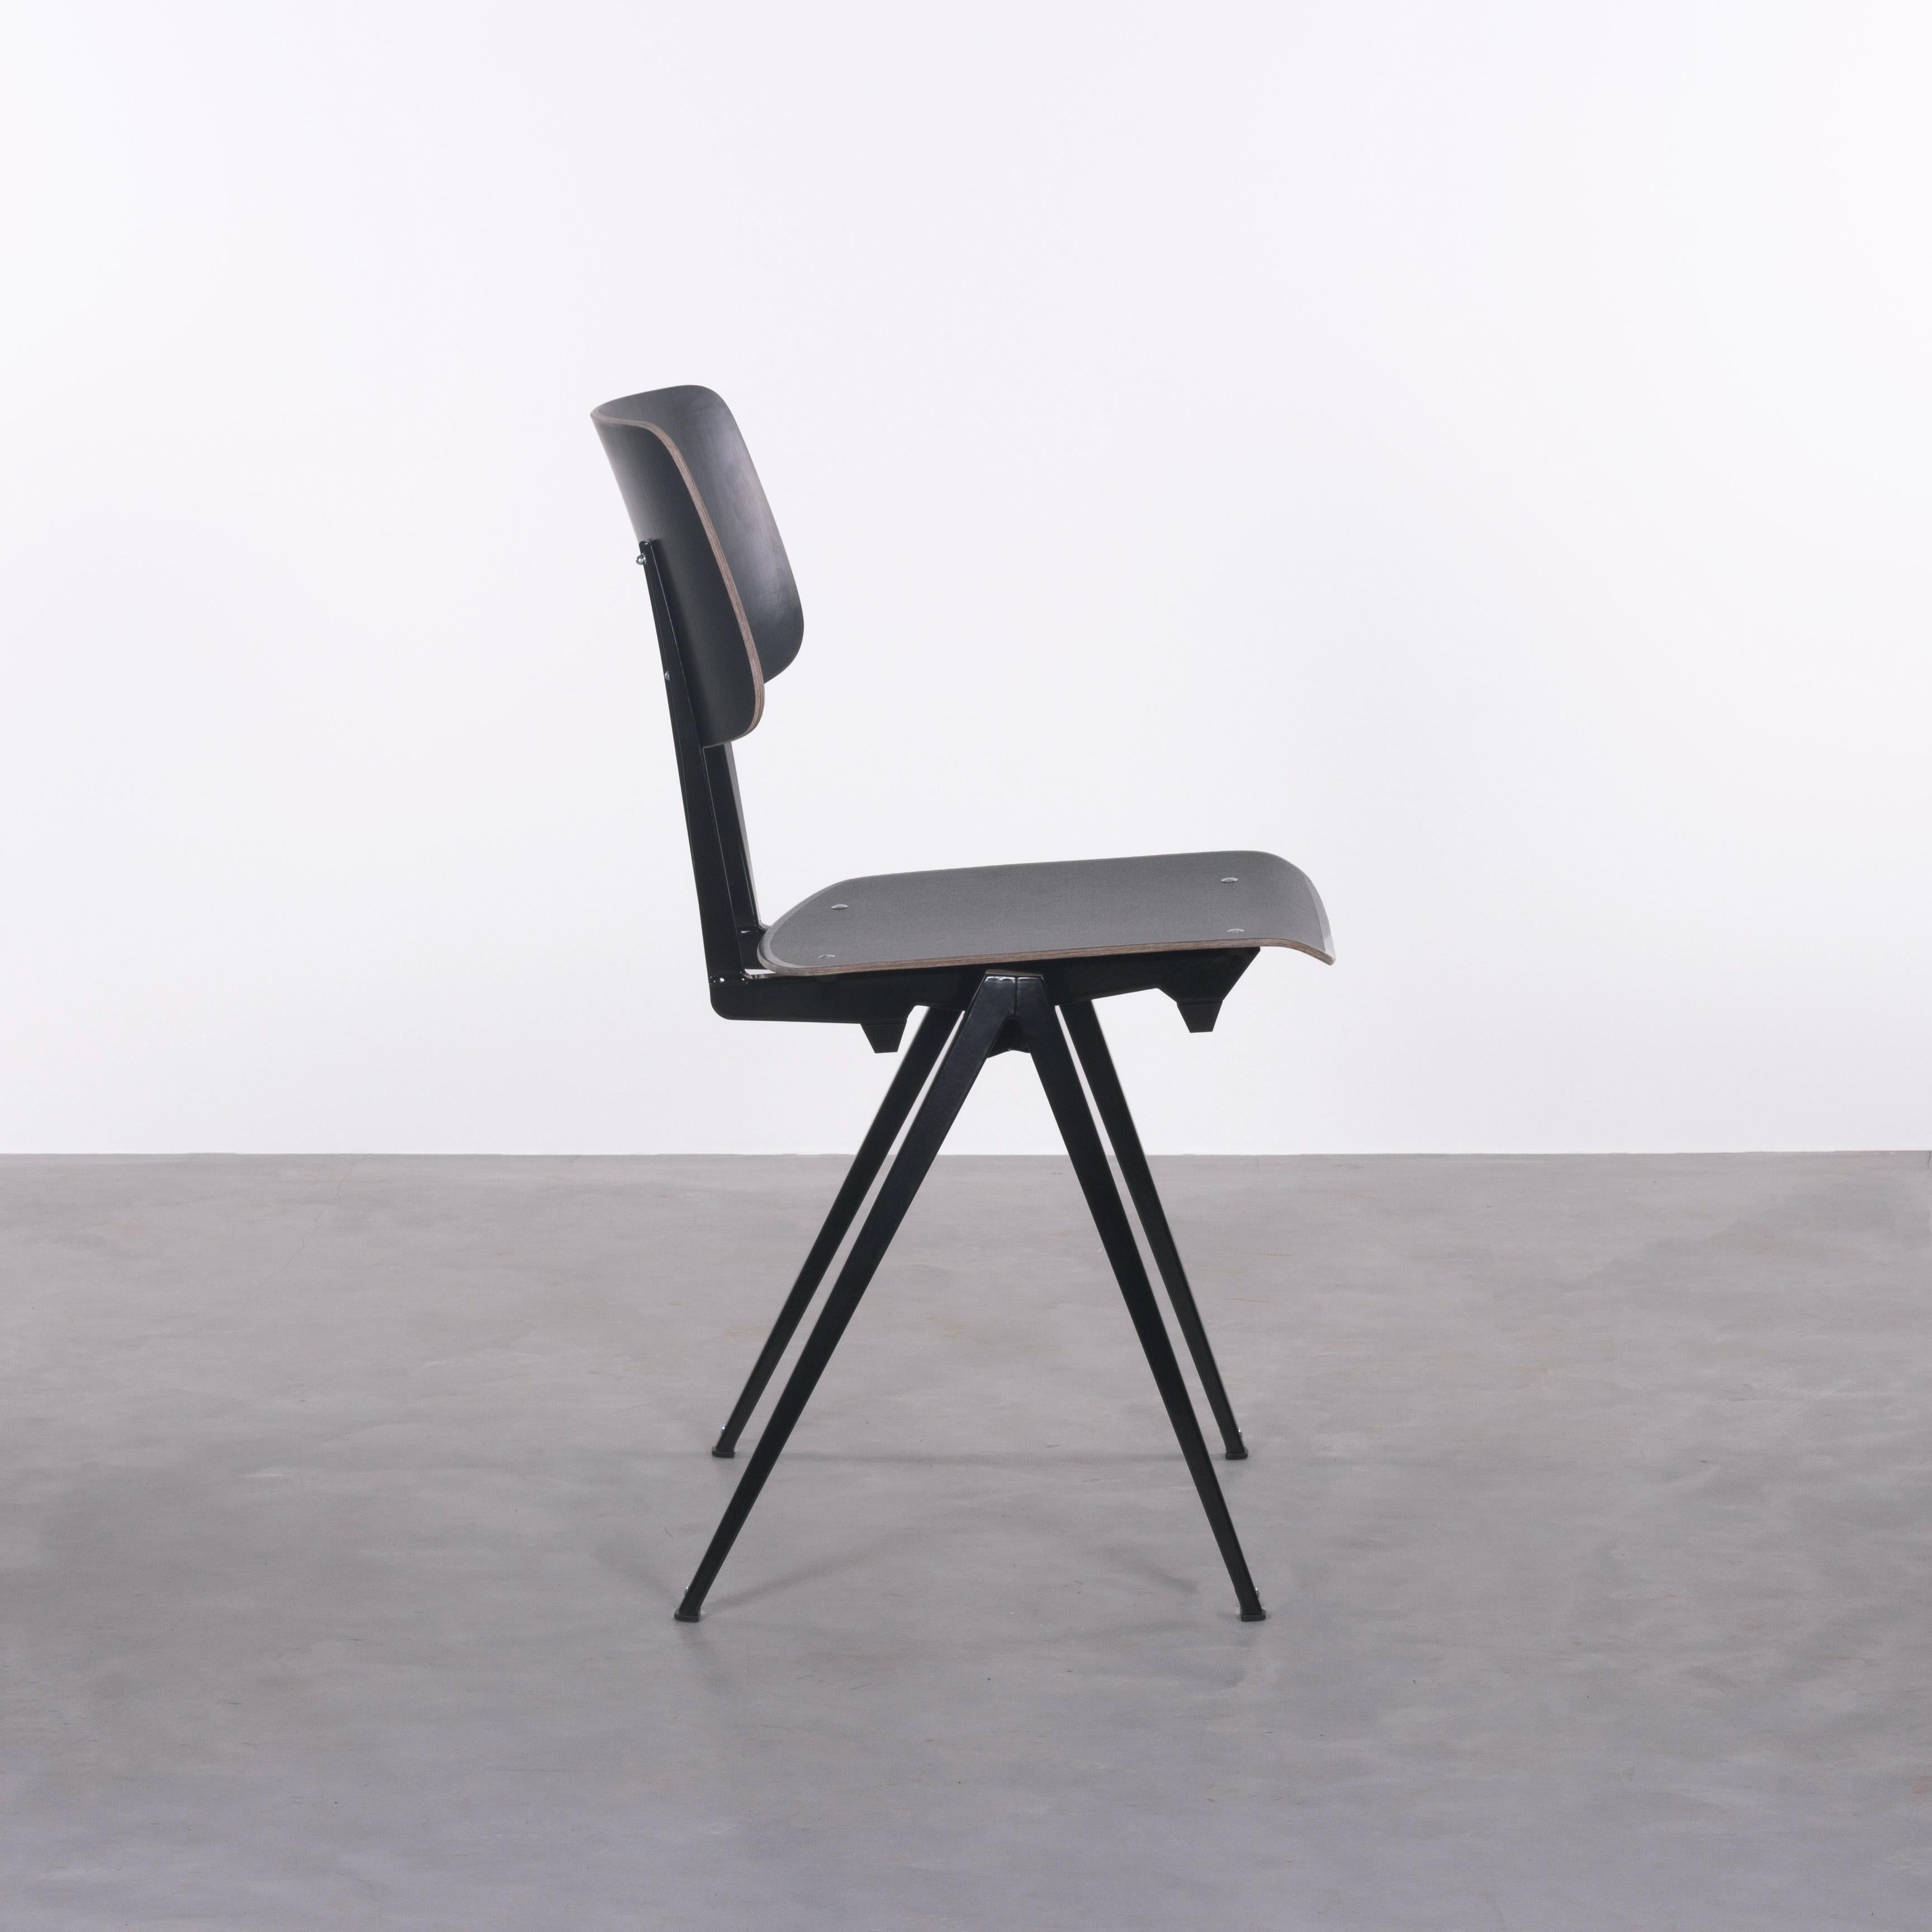 Powder-Coated Multiple Industrial Galvanitas S21 Stackable Dining Chairs in Black, Netherlands